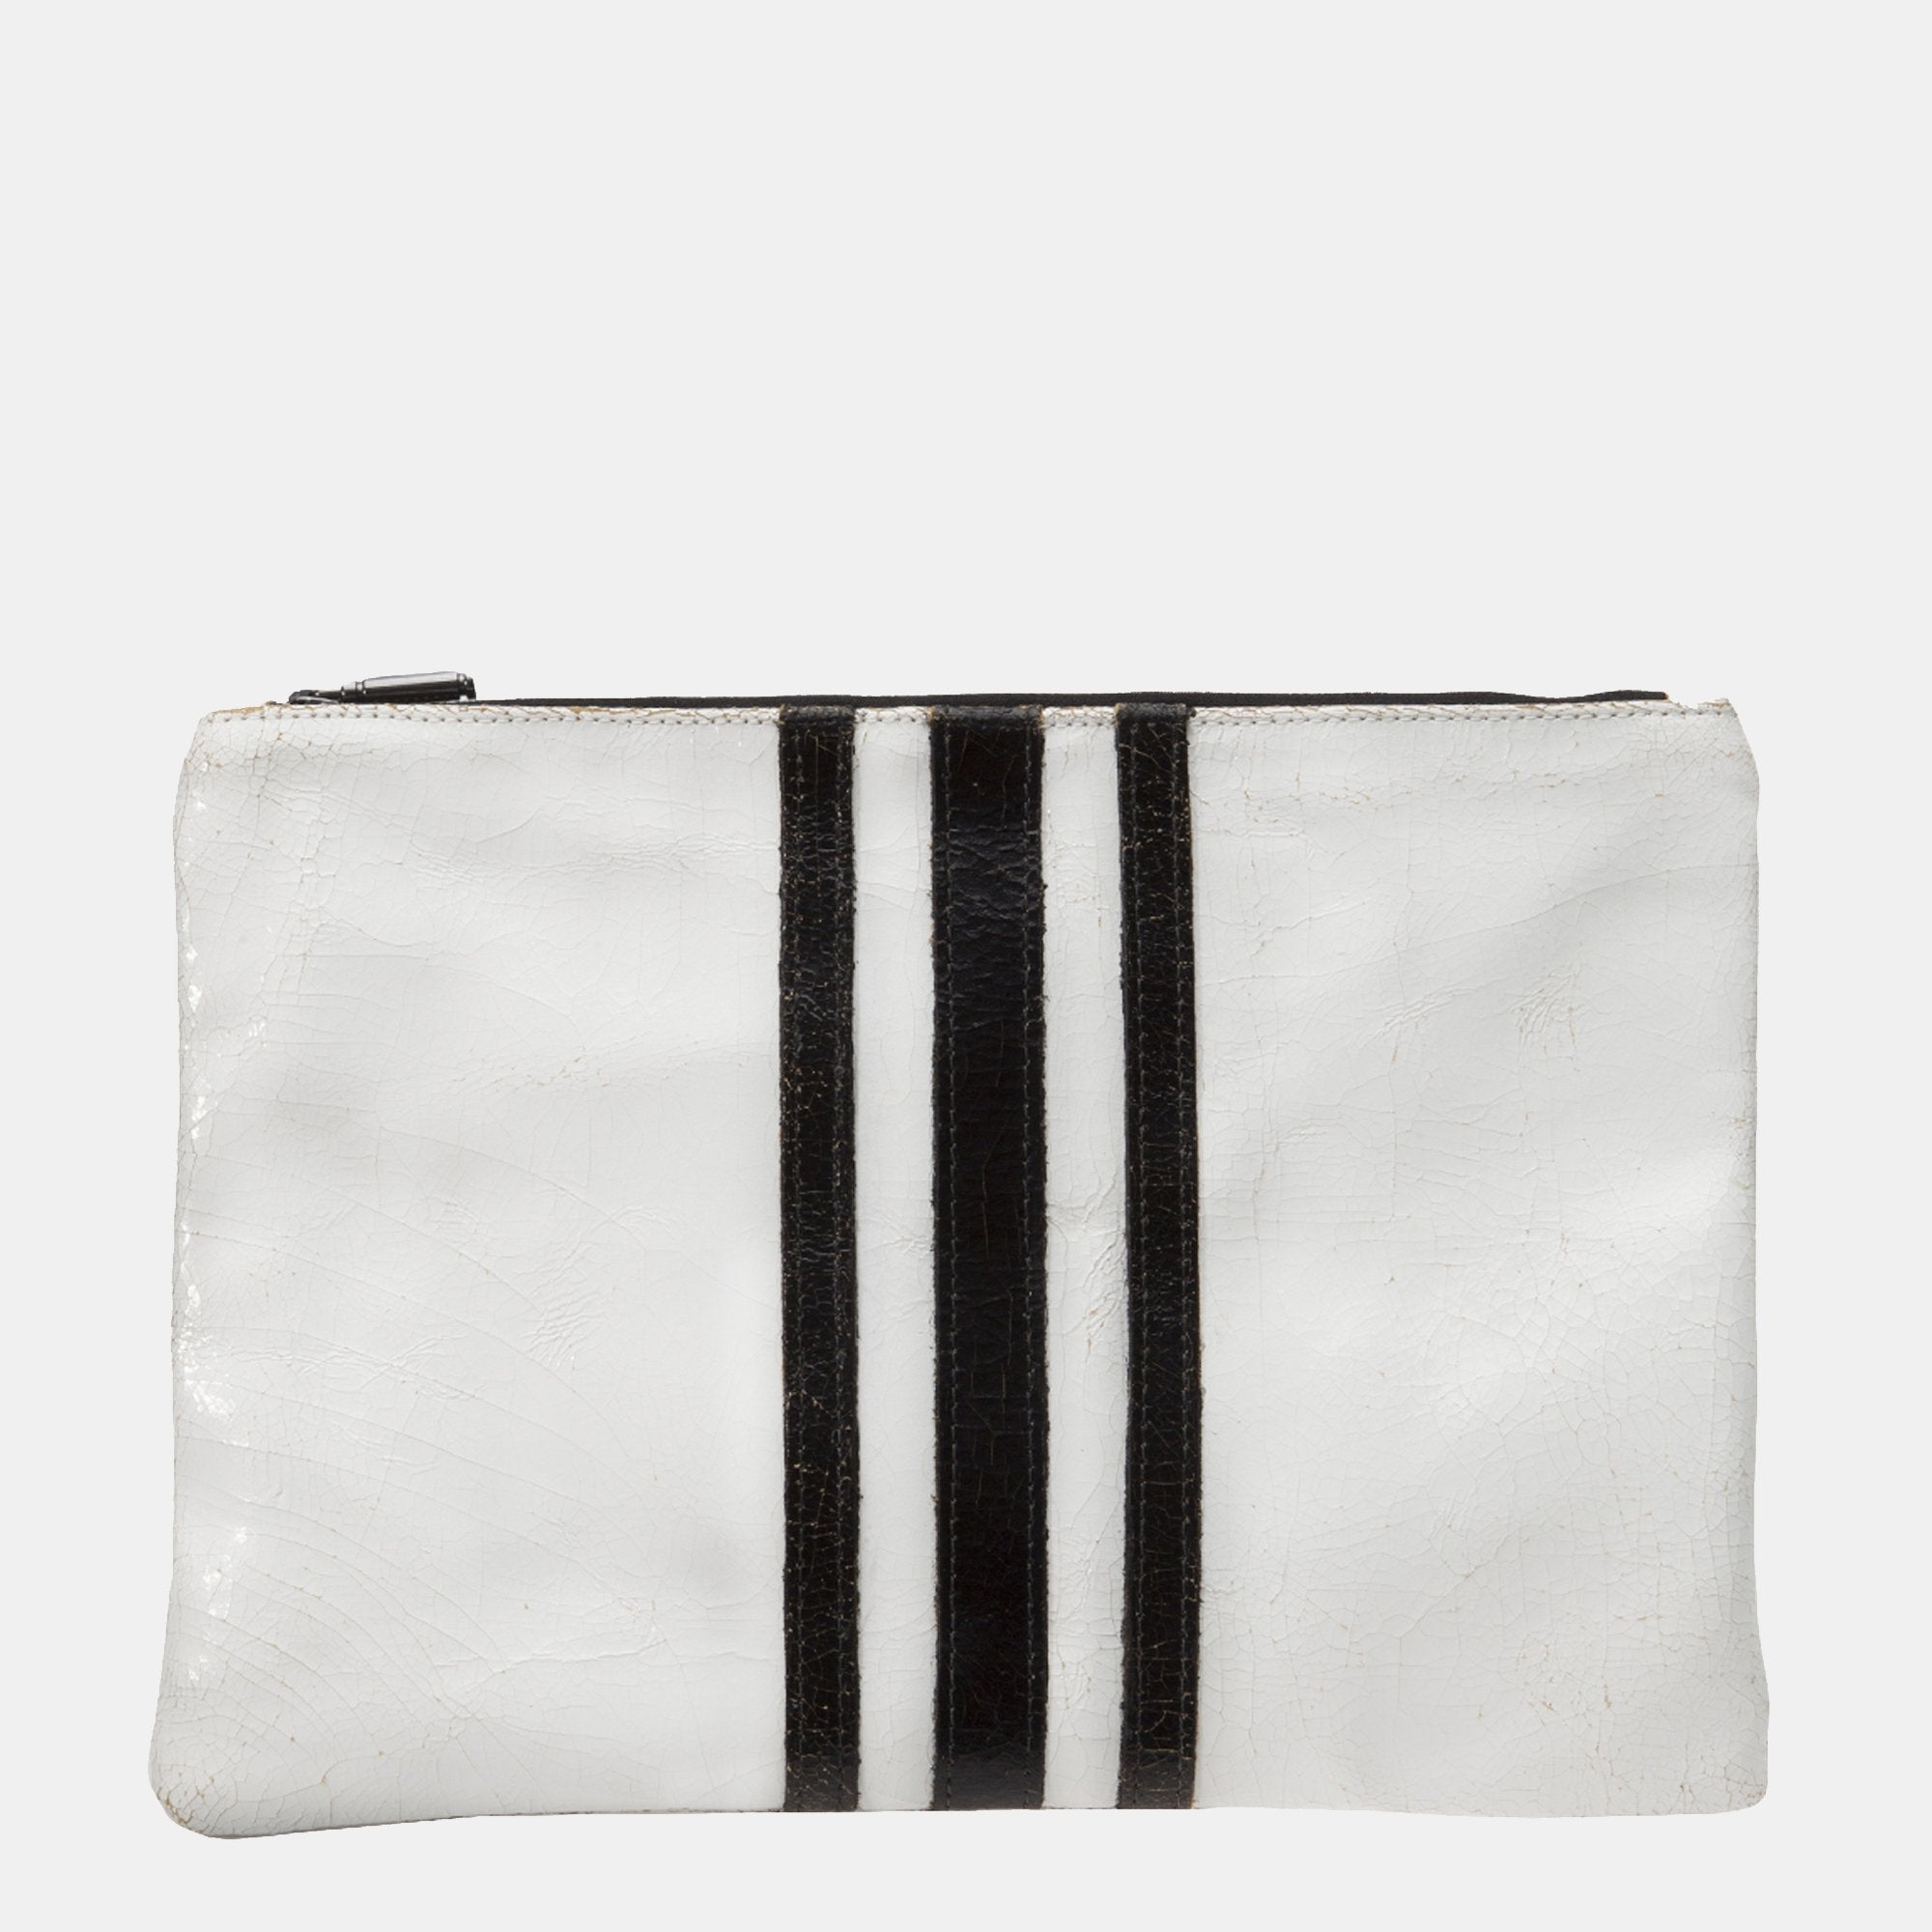 Luxury leather sustainable silk zip pouch cosmetics bag clutch stripes